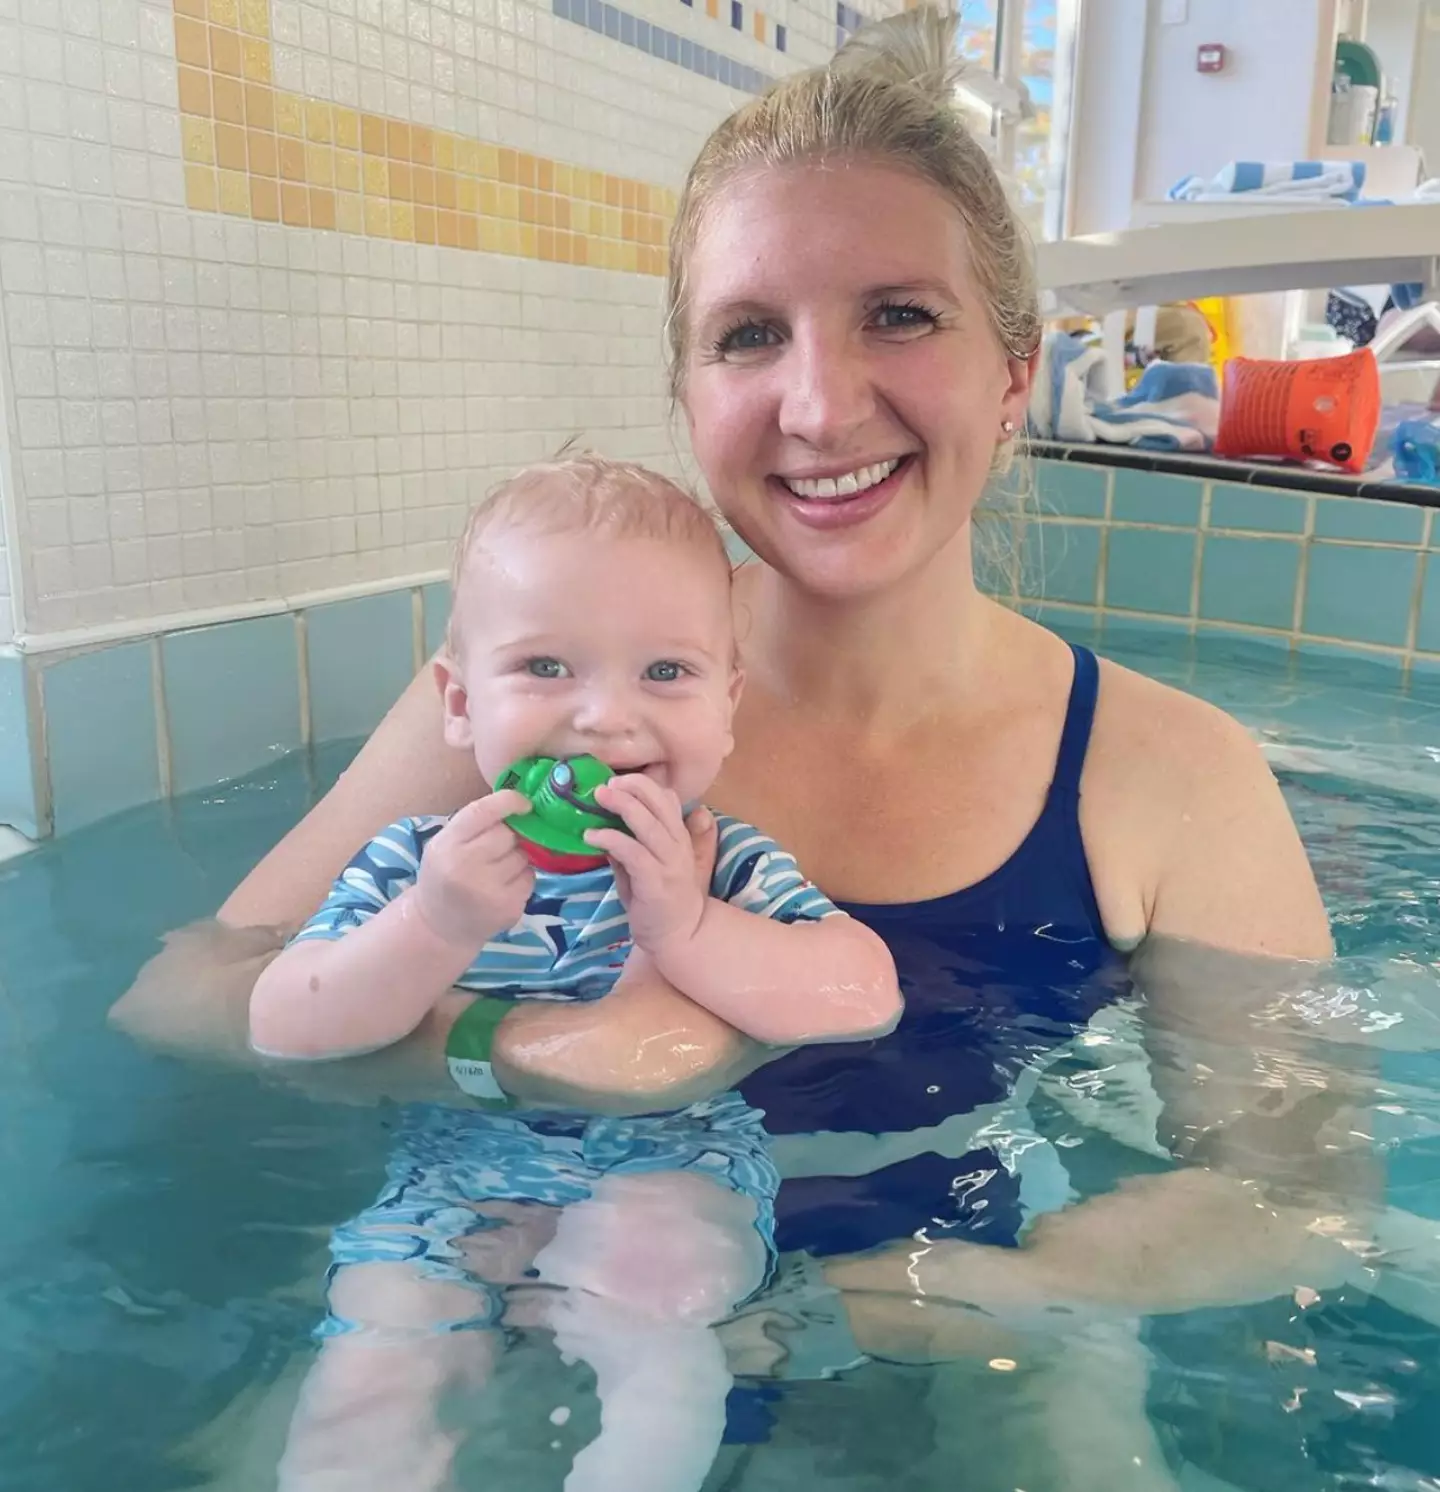 Rebecca Adlington is calling for the government to take action on the issue. (Instagram/@beckadlington)